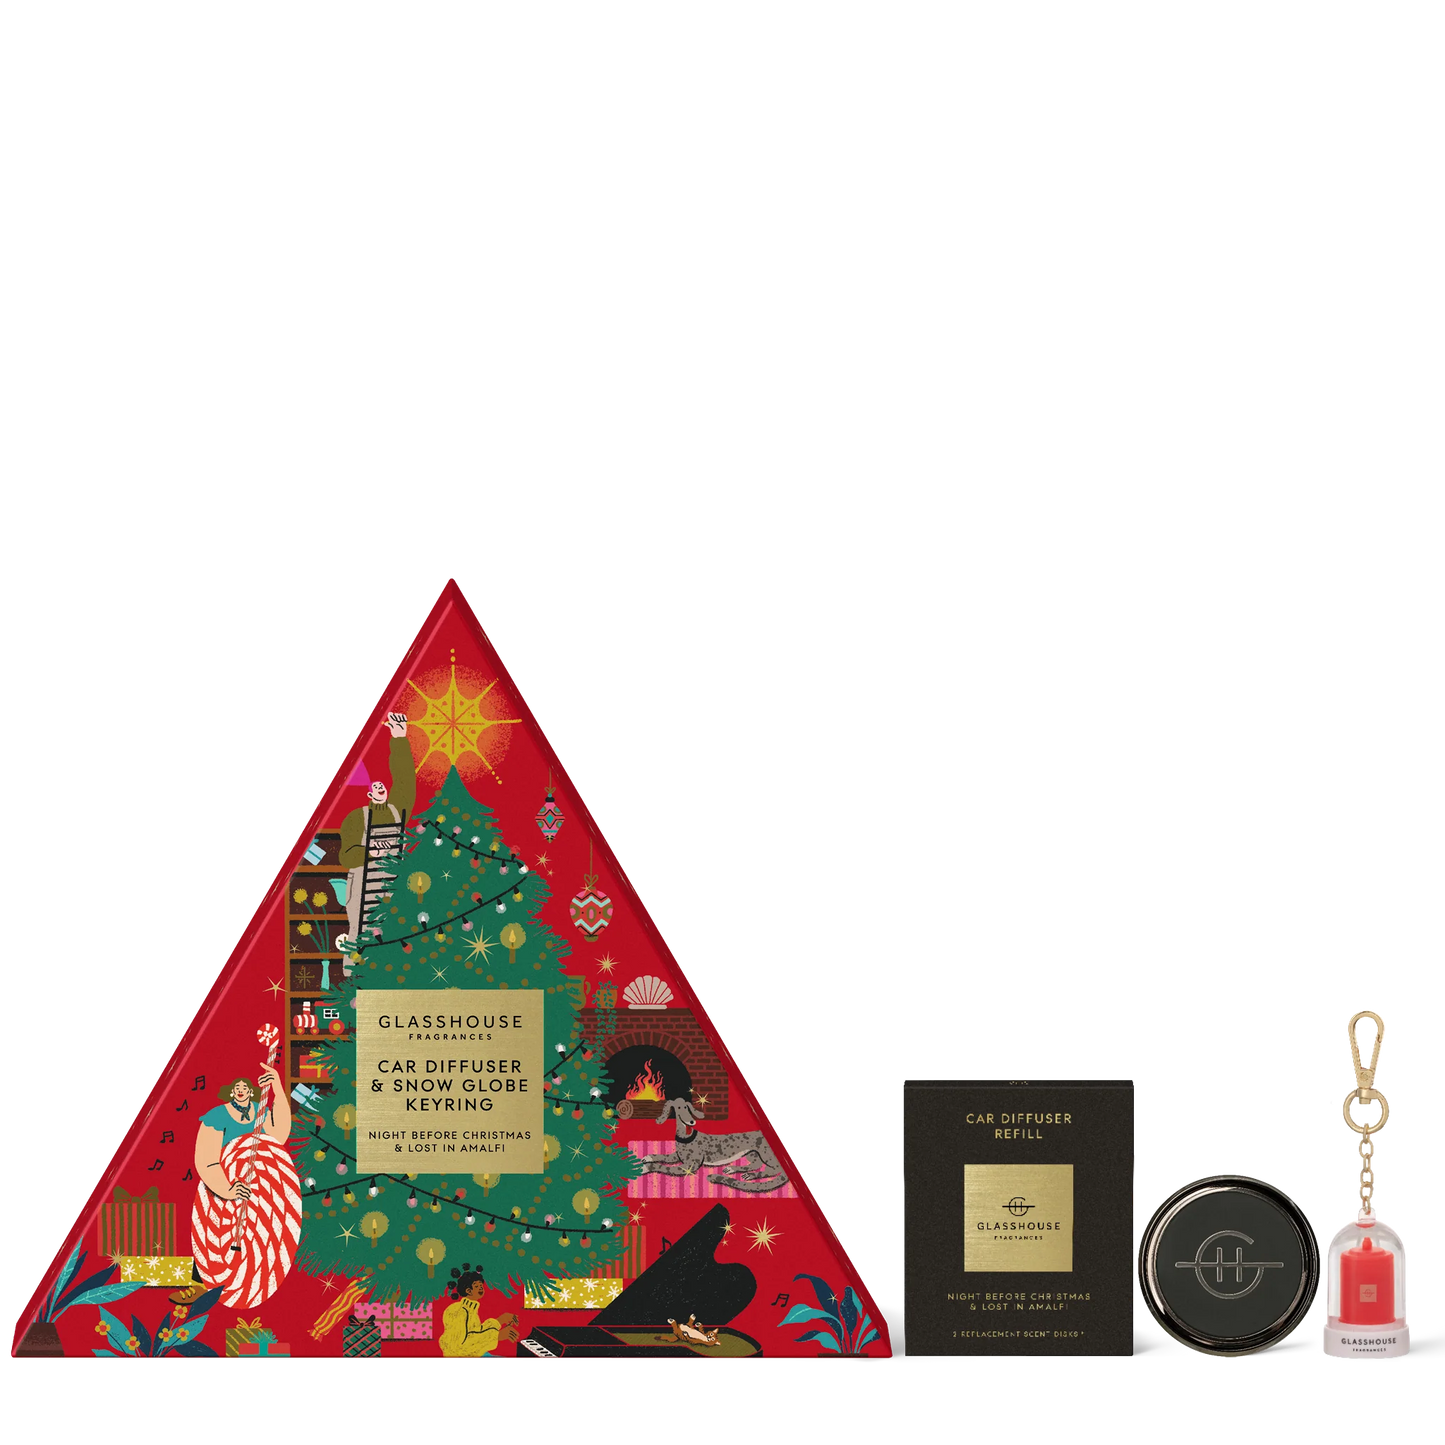 NEW Glasshouse - Night Before Christmas Car Diffuser Gift Set